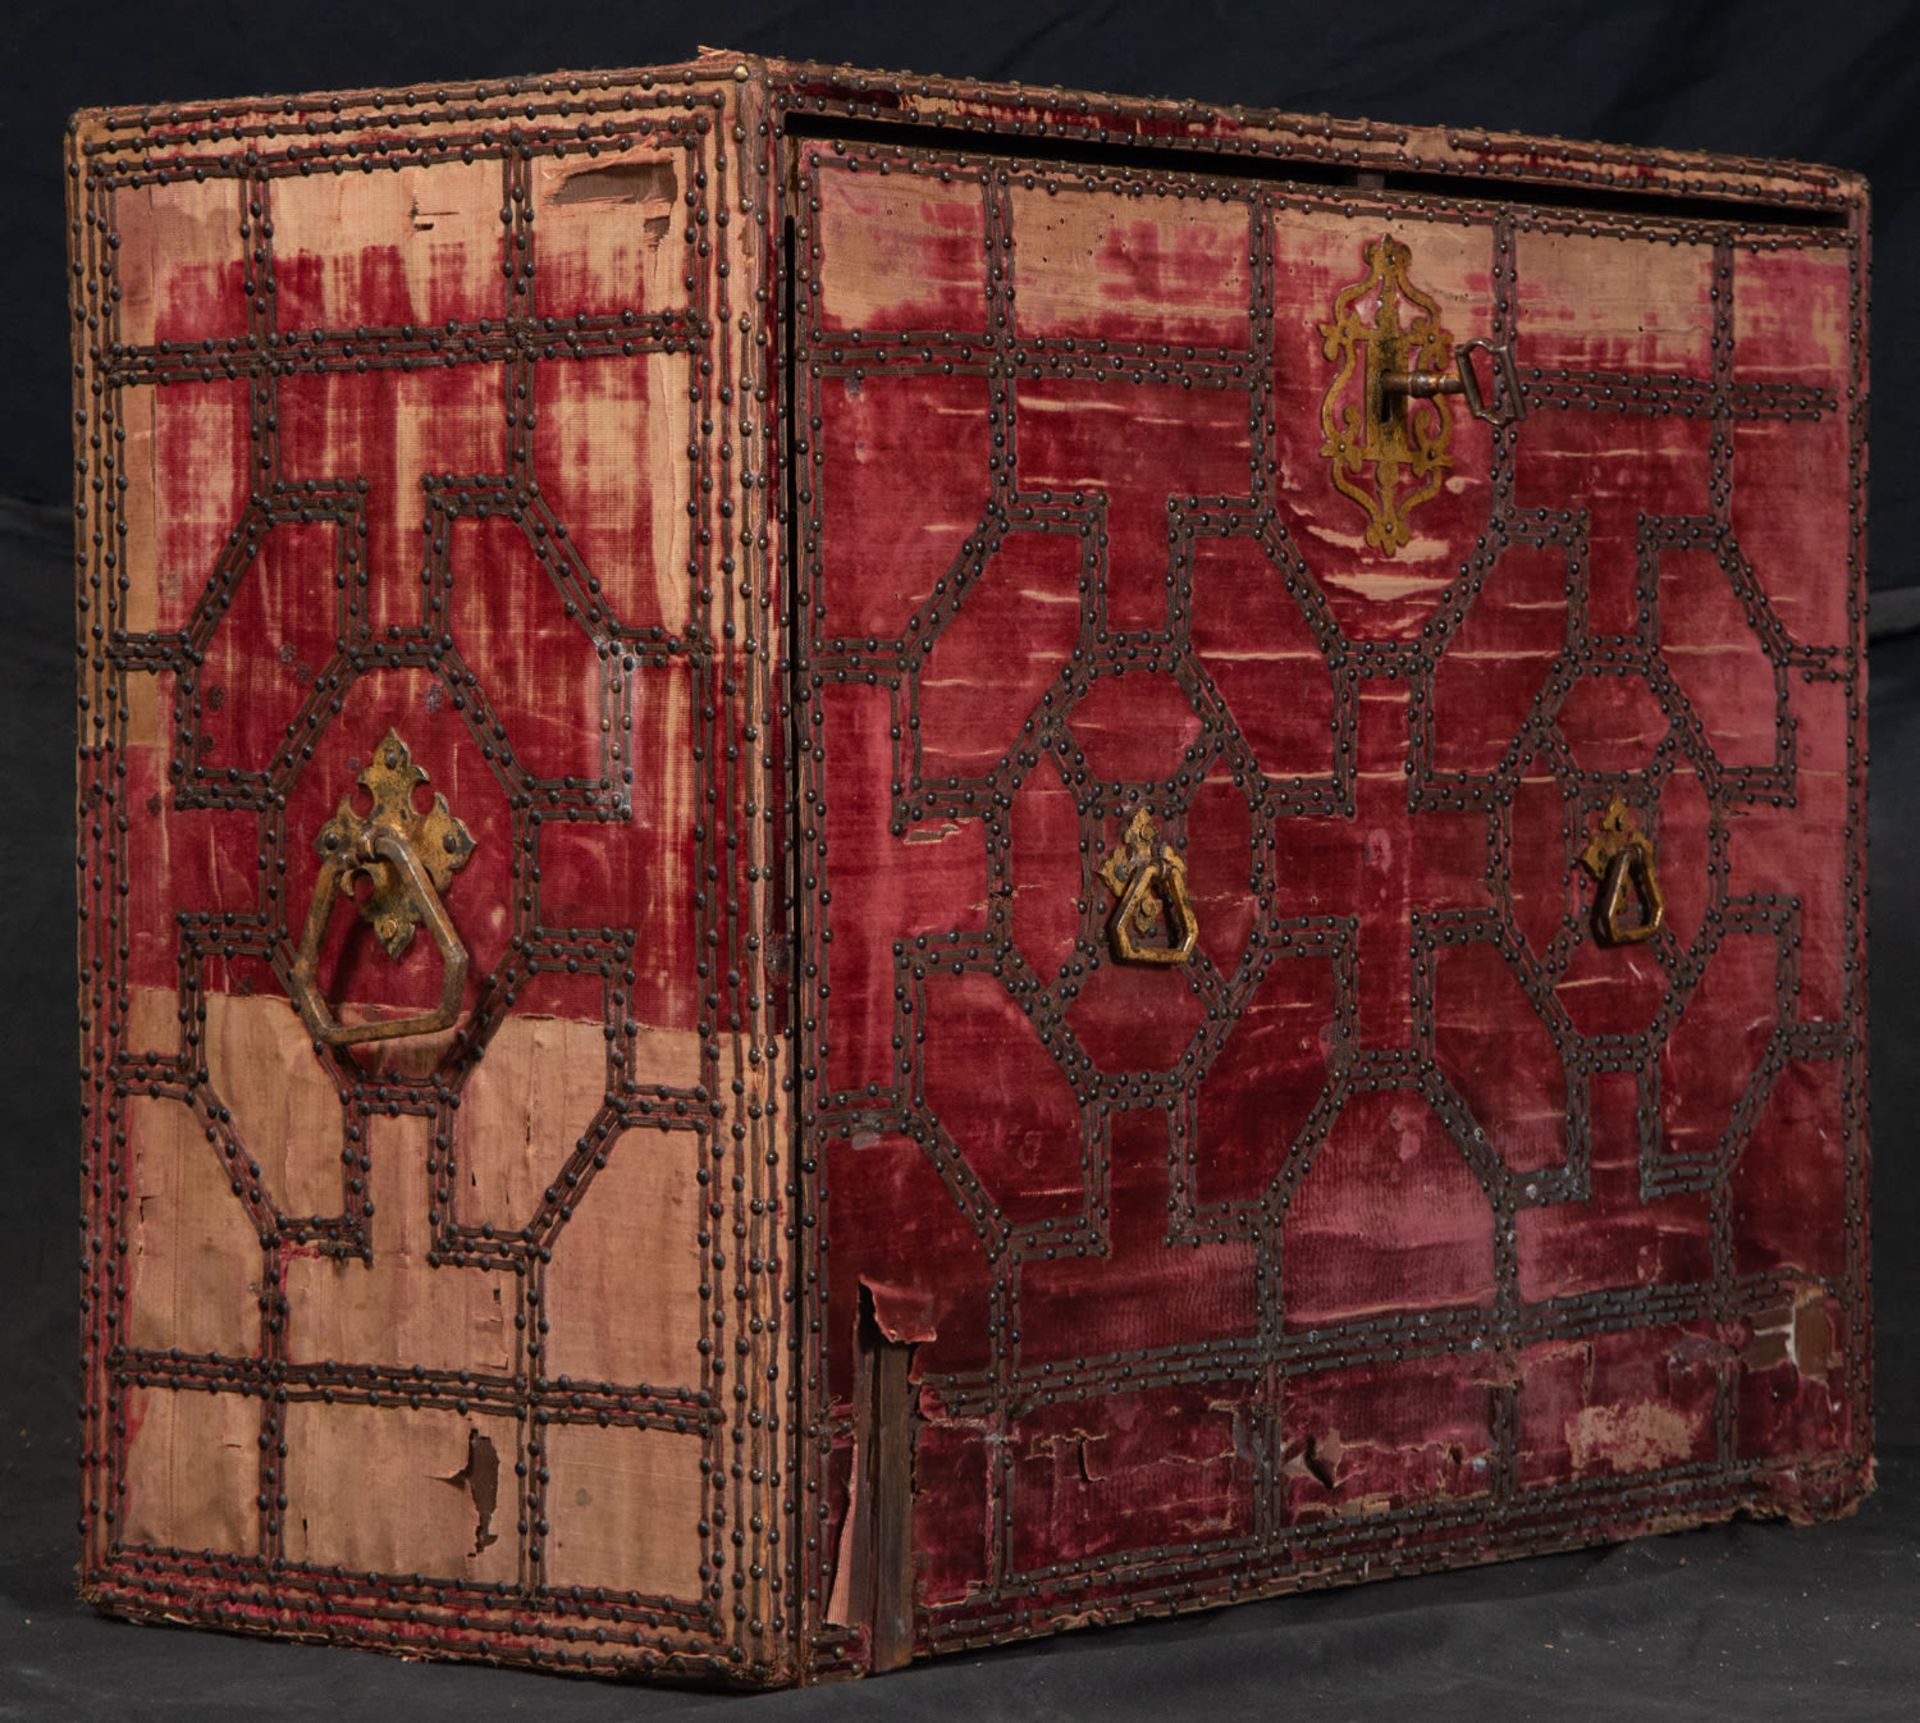 Desk-Type cabinet in velvet and silver-coated drawers, Hispano Flemish work from the 17th century - Image 3 of 6